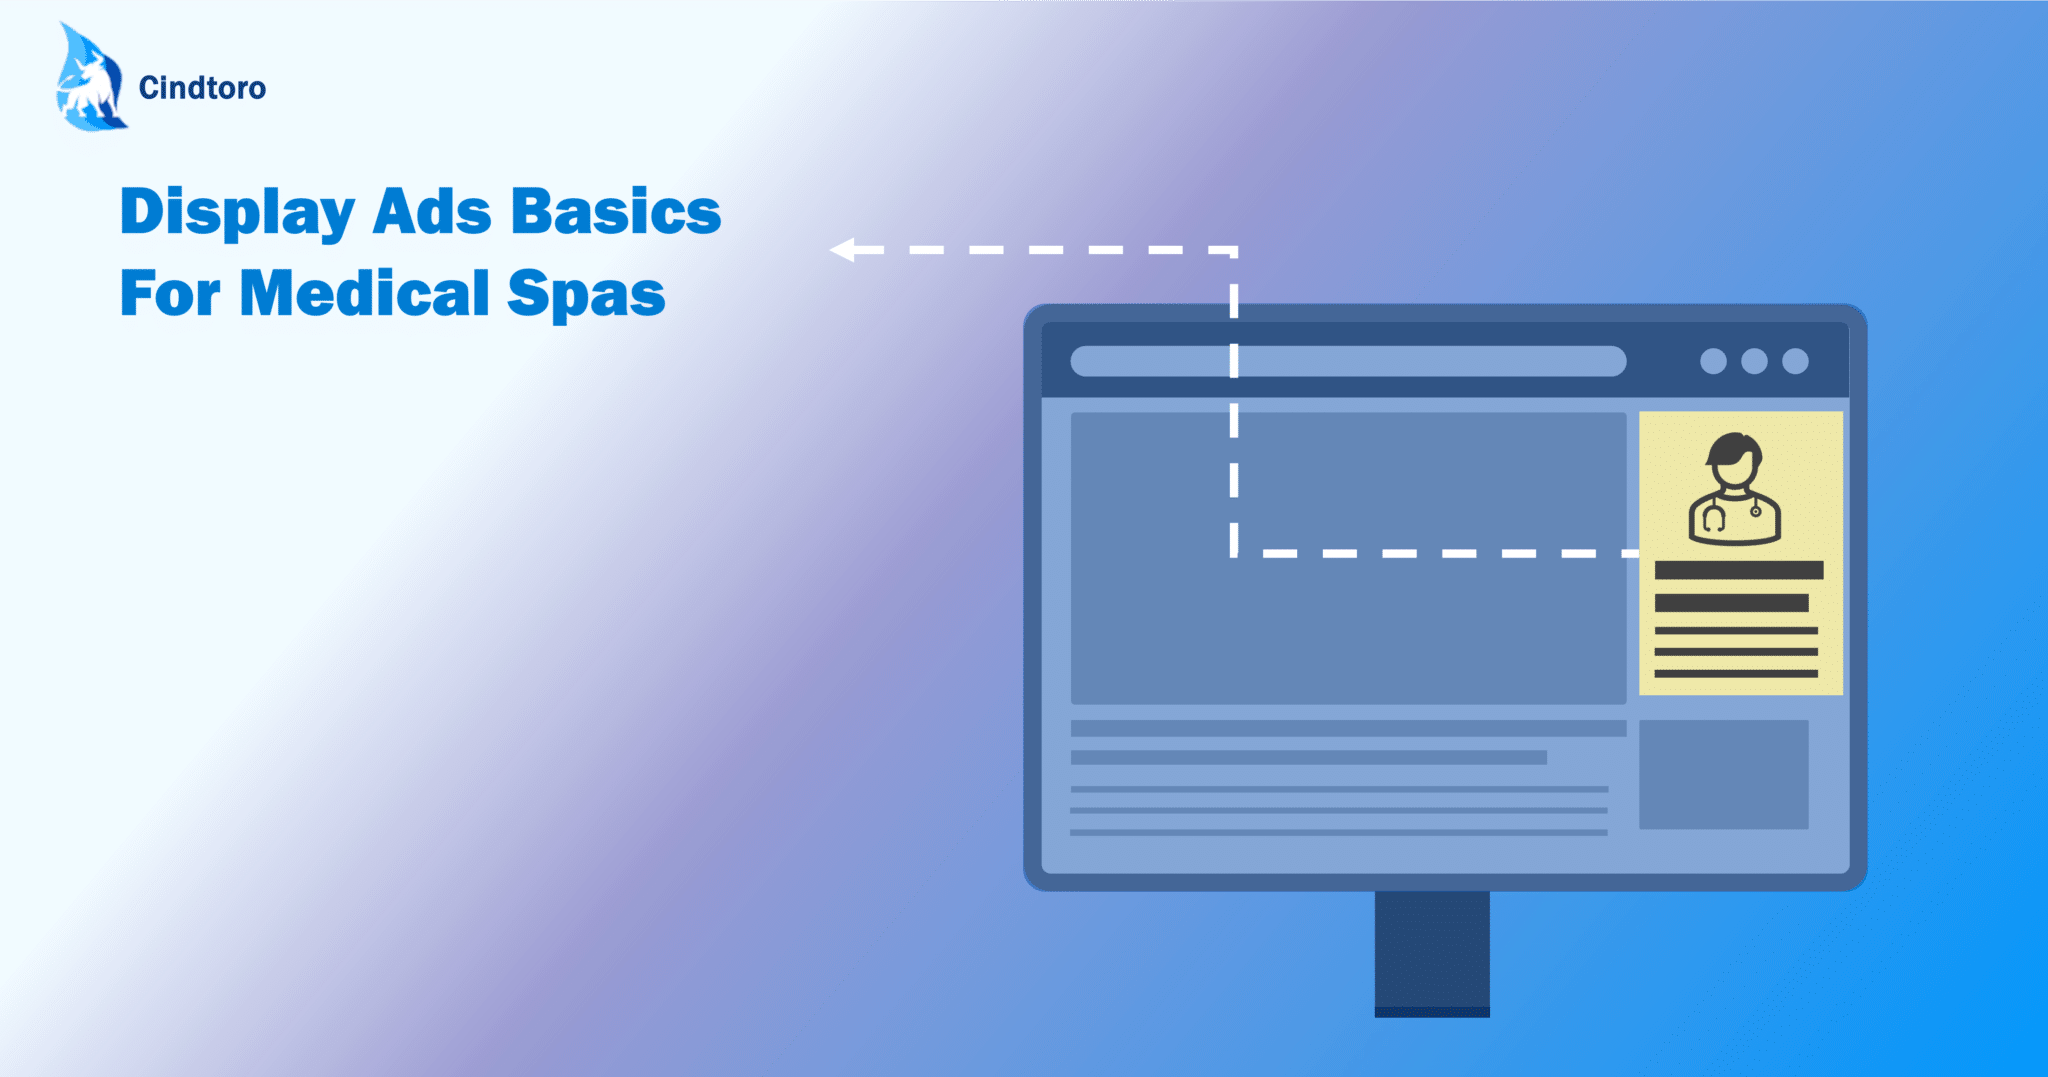 Learn the display advertising basics for medical spas